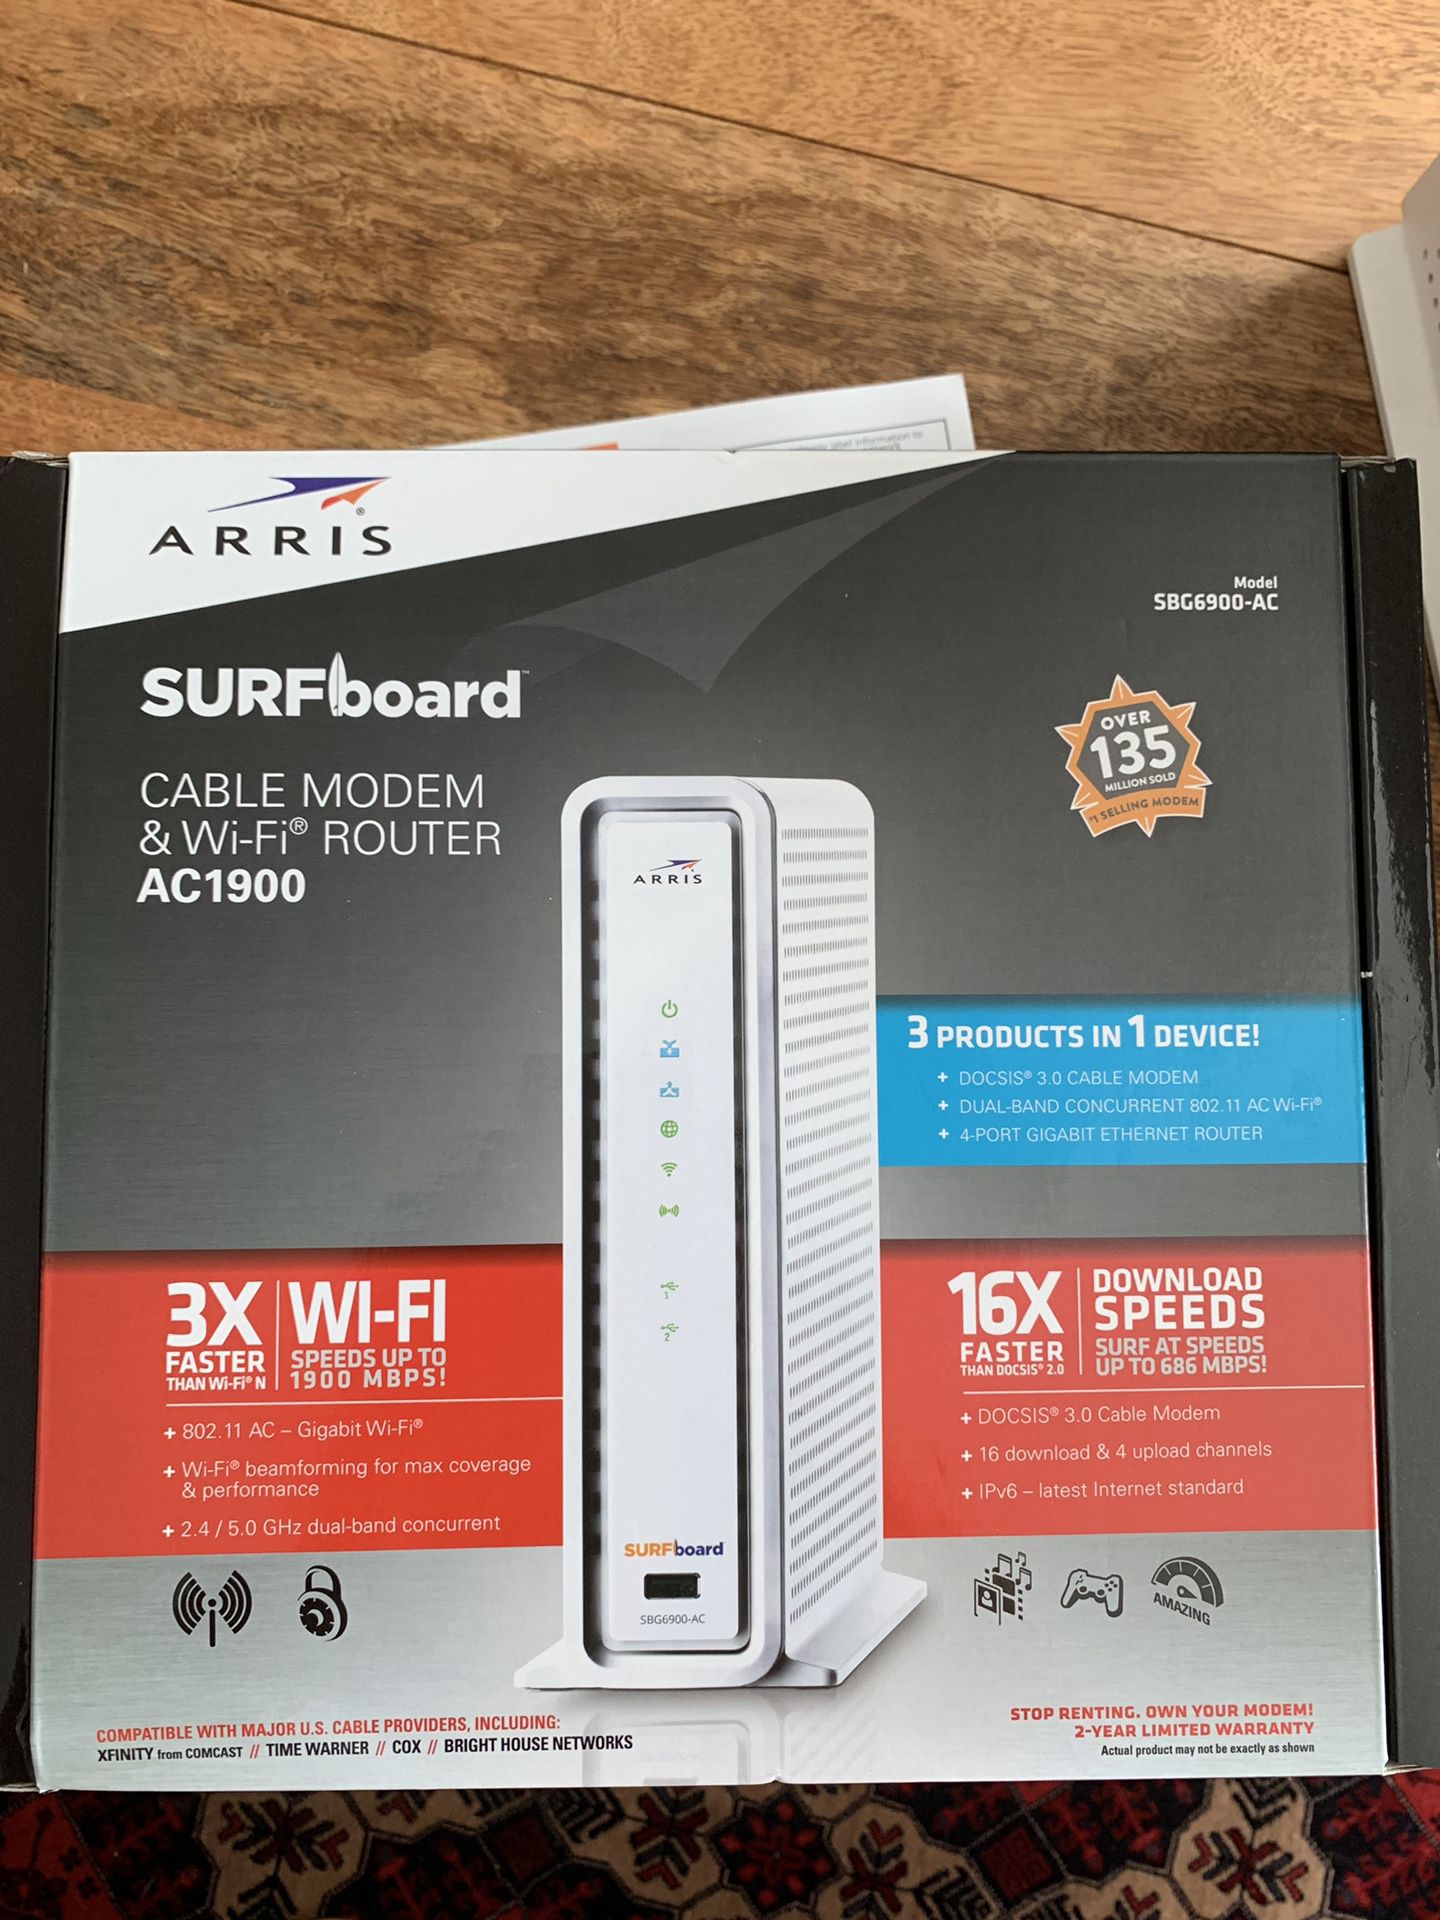 SURFboard Cable modem & wi-fi AC1900